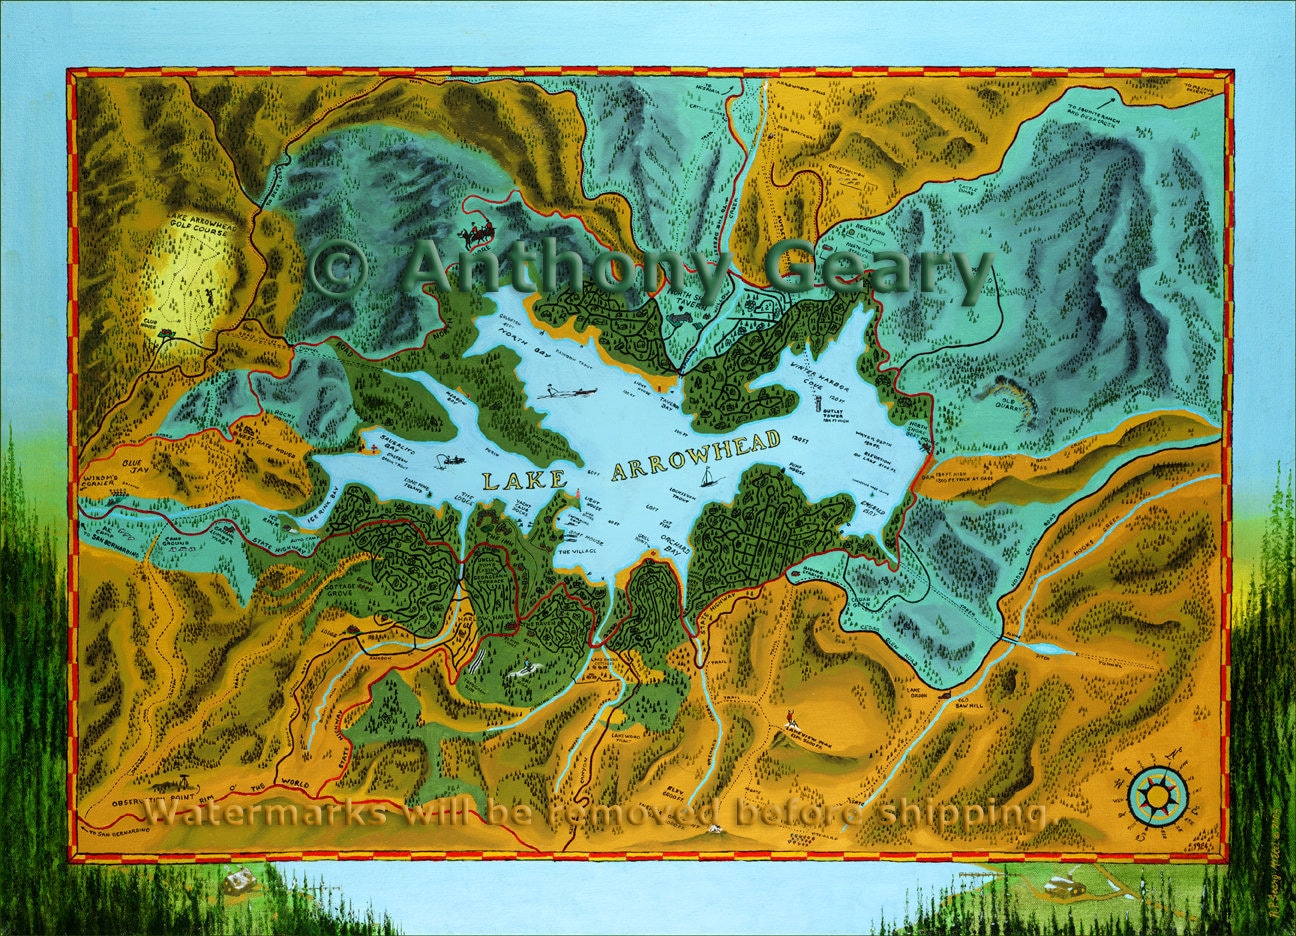 Lake Arrowhead Map Circa 1924 Oil Painting by Anthony P. image image pic